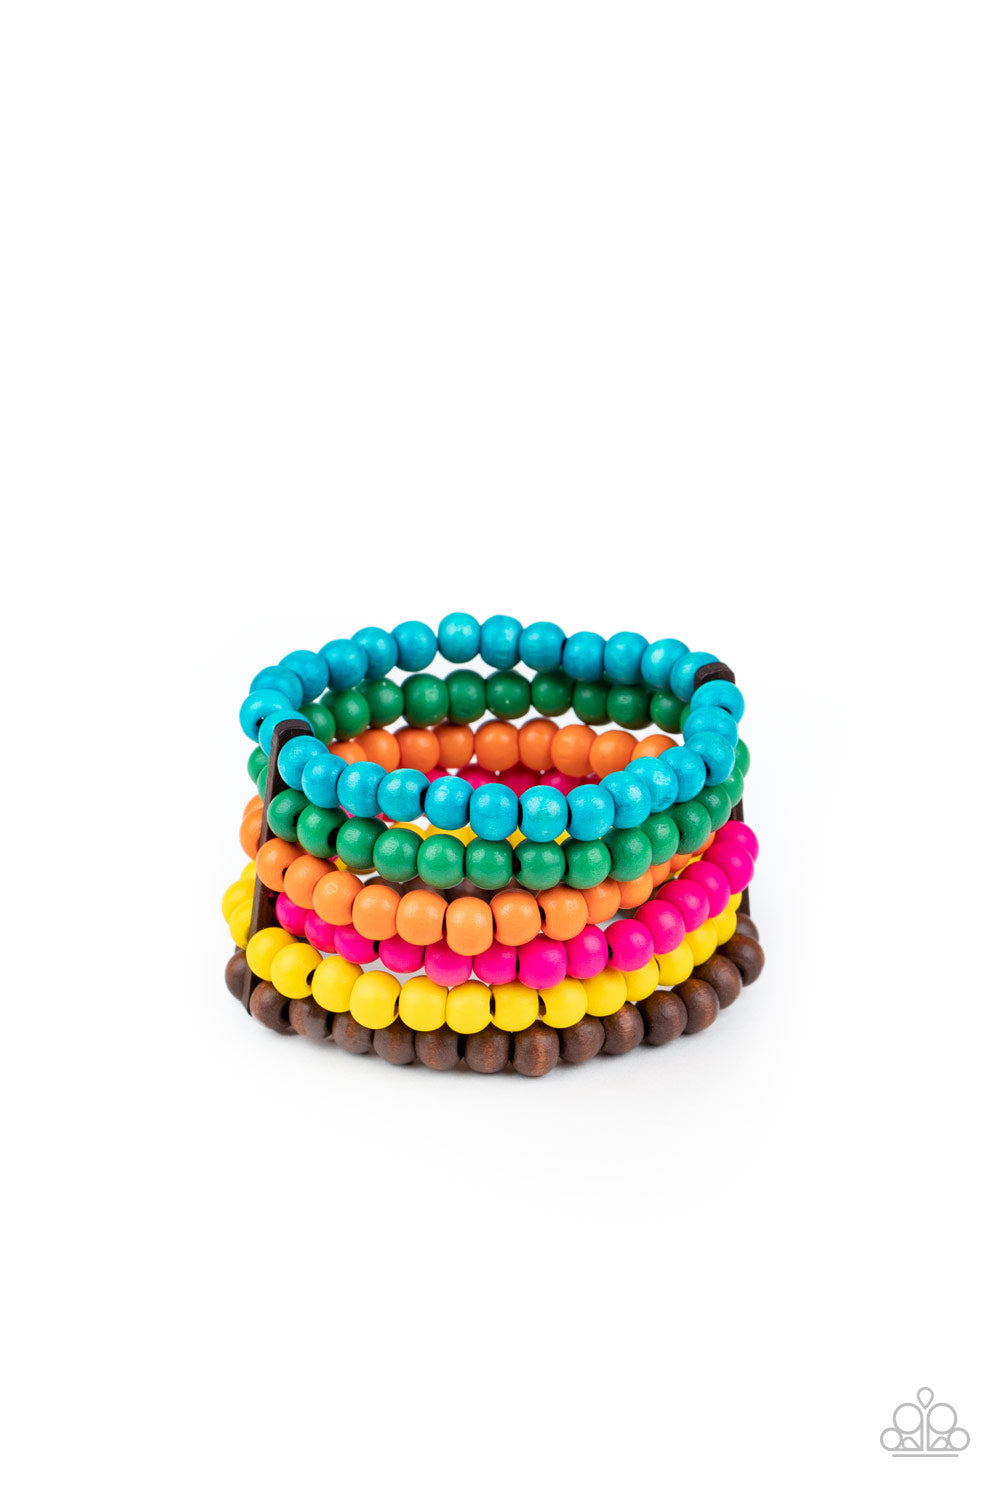 Diving in Maldives Multi Wooden Bracelet - Paparazzi Accessories.  Held in place with rectangular wooden fittings, a collection of vivacious pink, blue, orange, green, yellow, and brown wooden beads are threaded along stretchy bands around the wrist, creating colorful layers.  ﻿﻿﻿All Paparazzi Accessories are lead free and nickel free!  Sold as one individual bracelet.